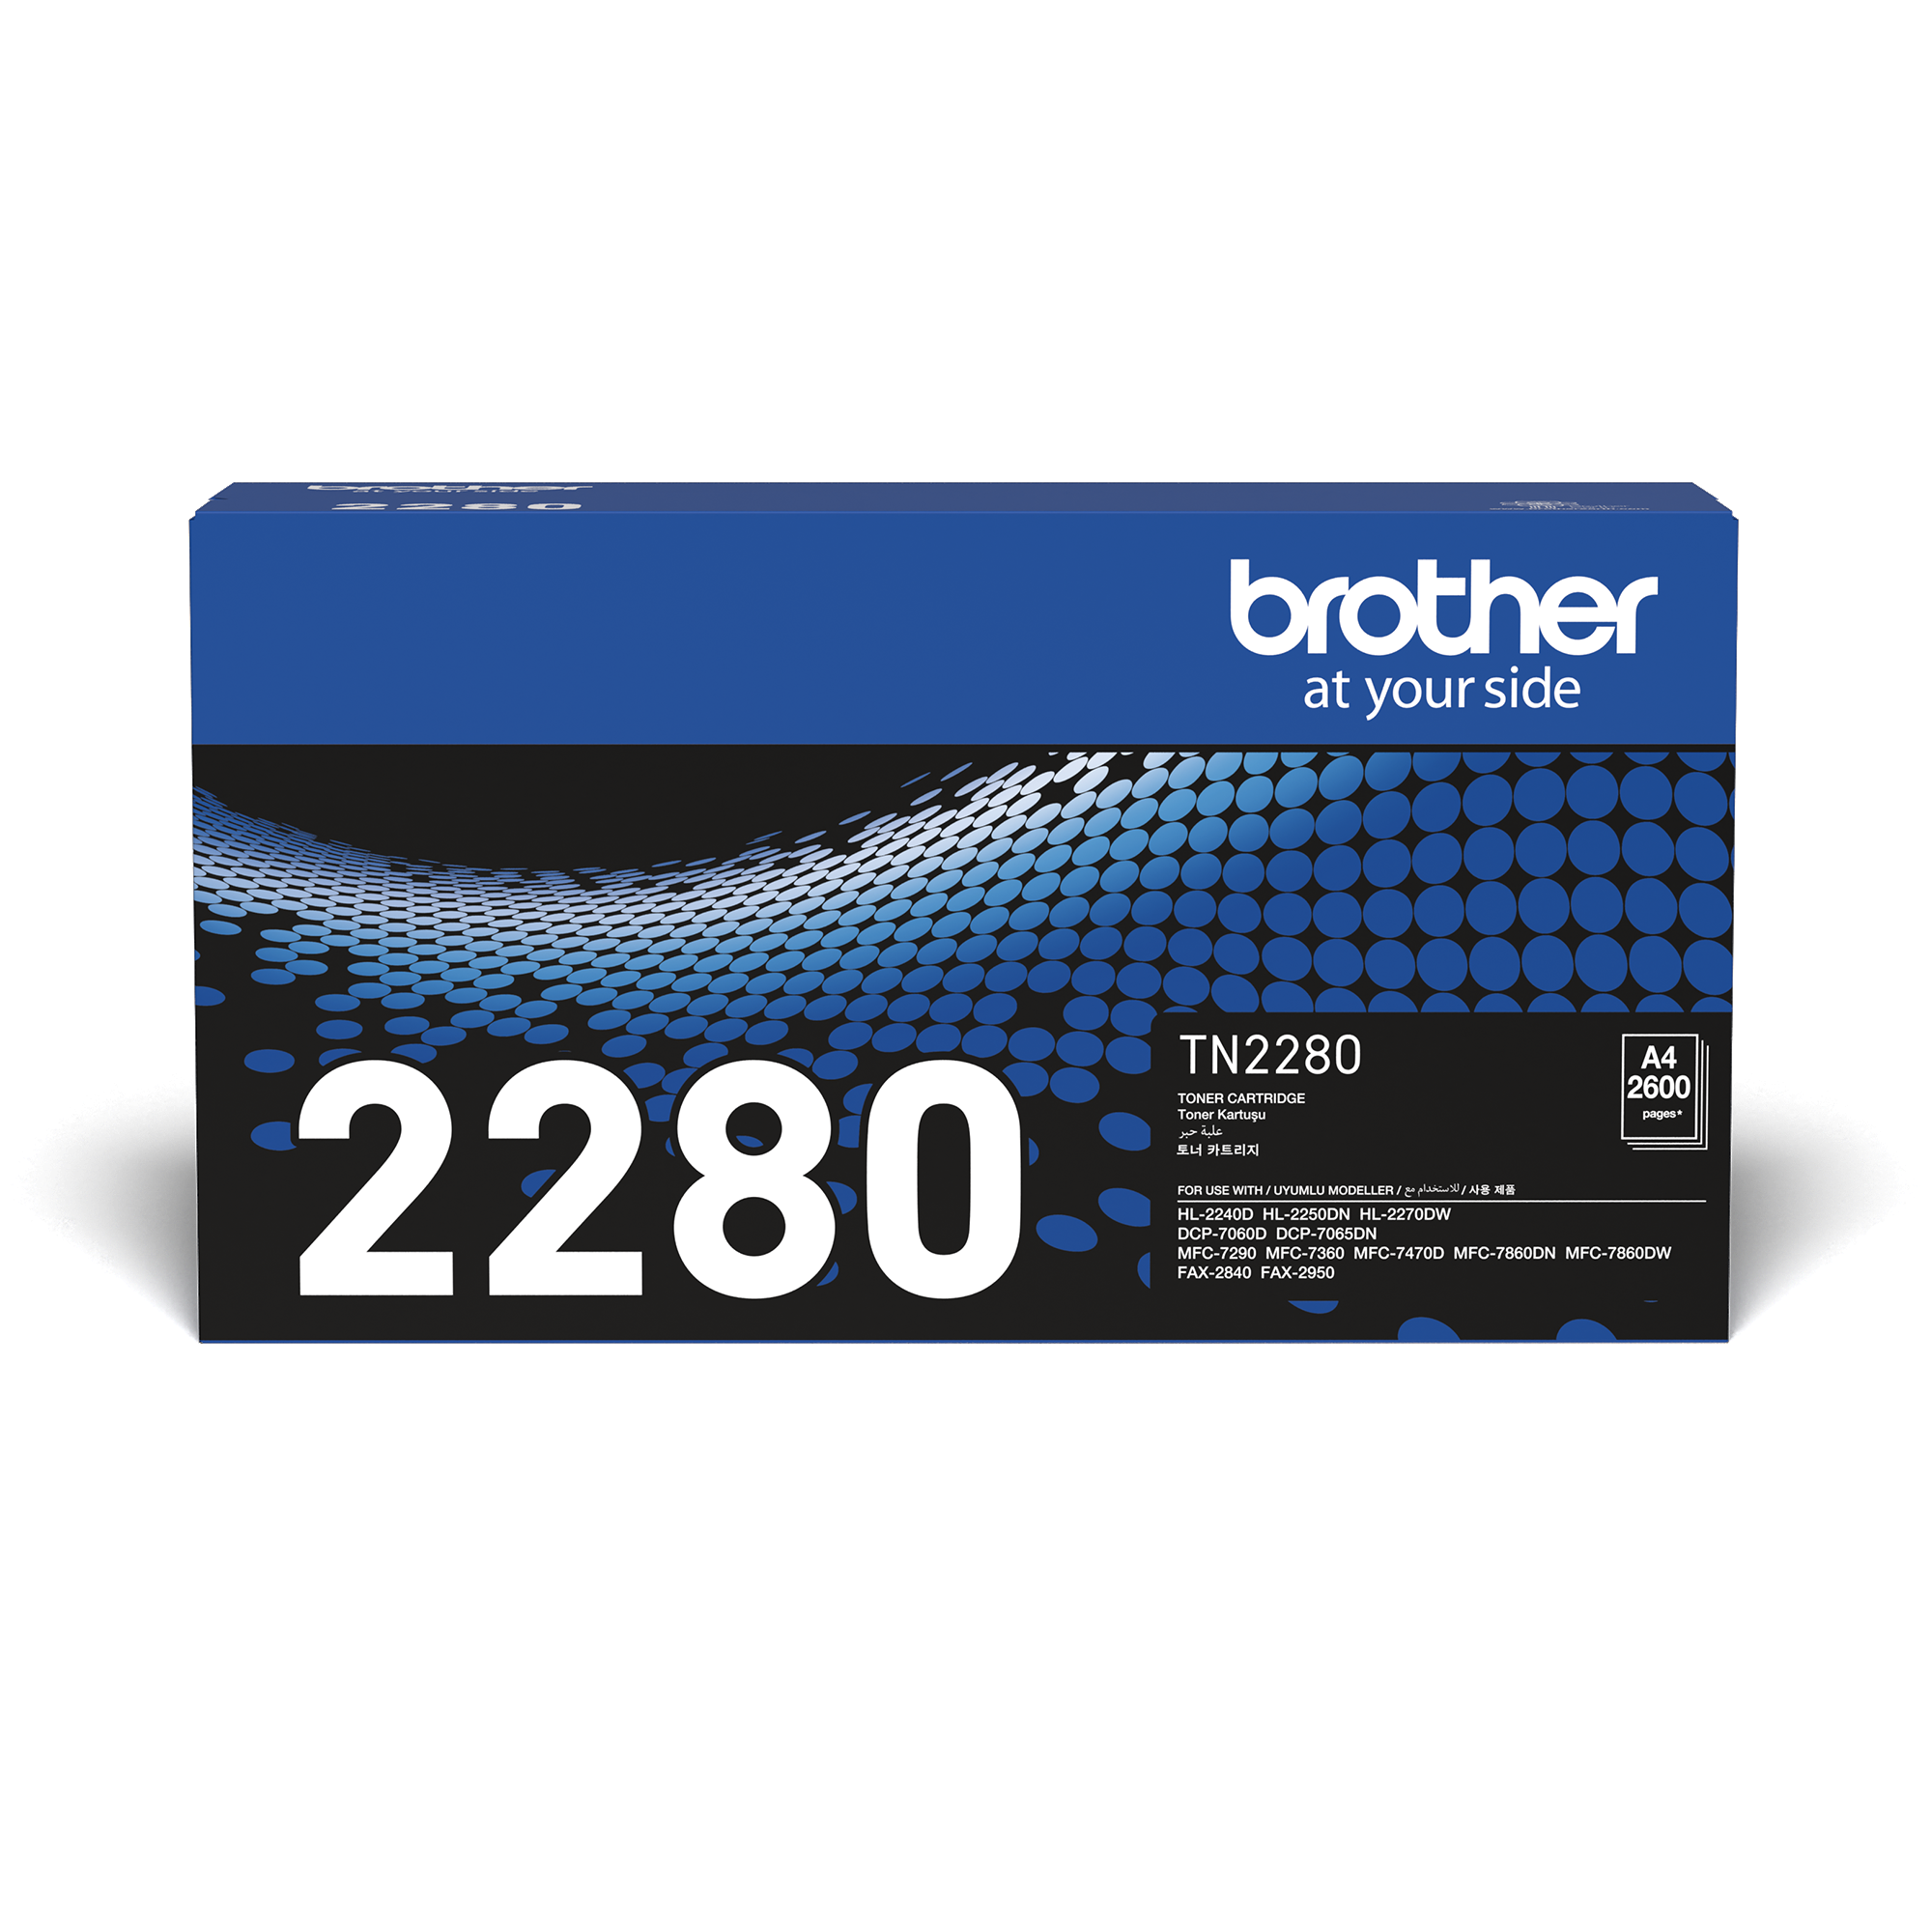 Brother TN2280 TN-2280 Toner Cartridge (2,600 Pages)